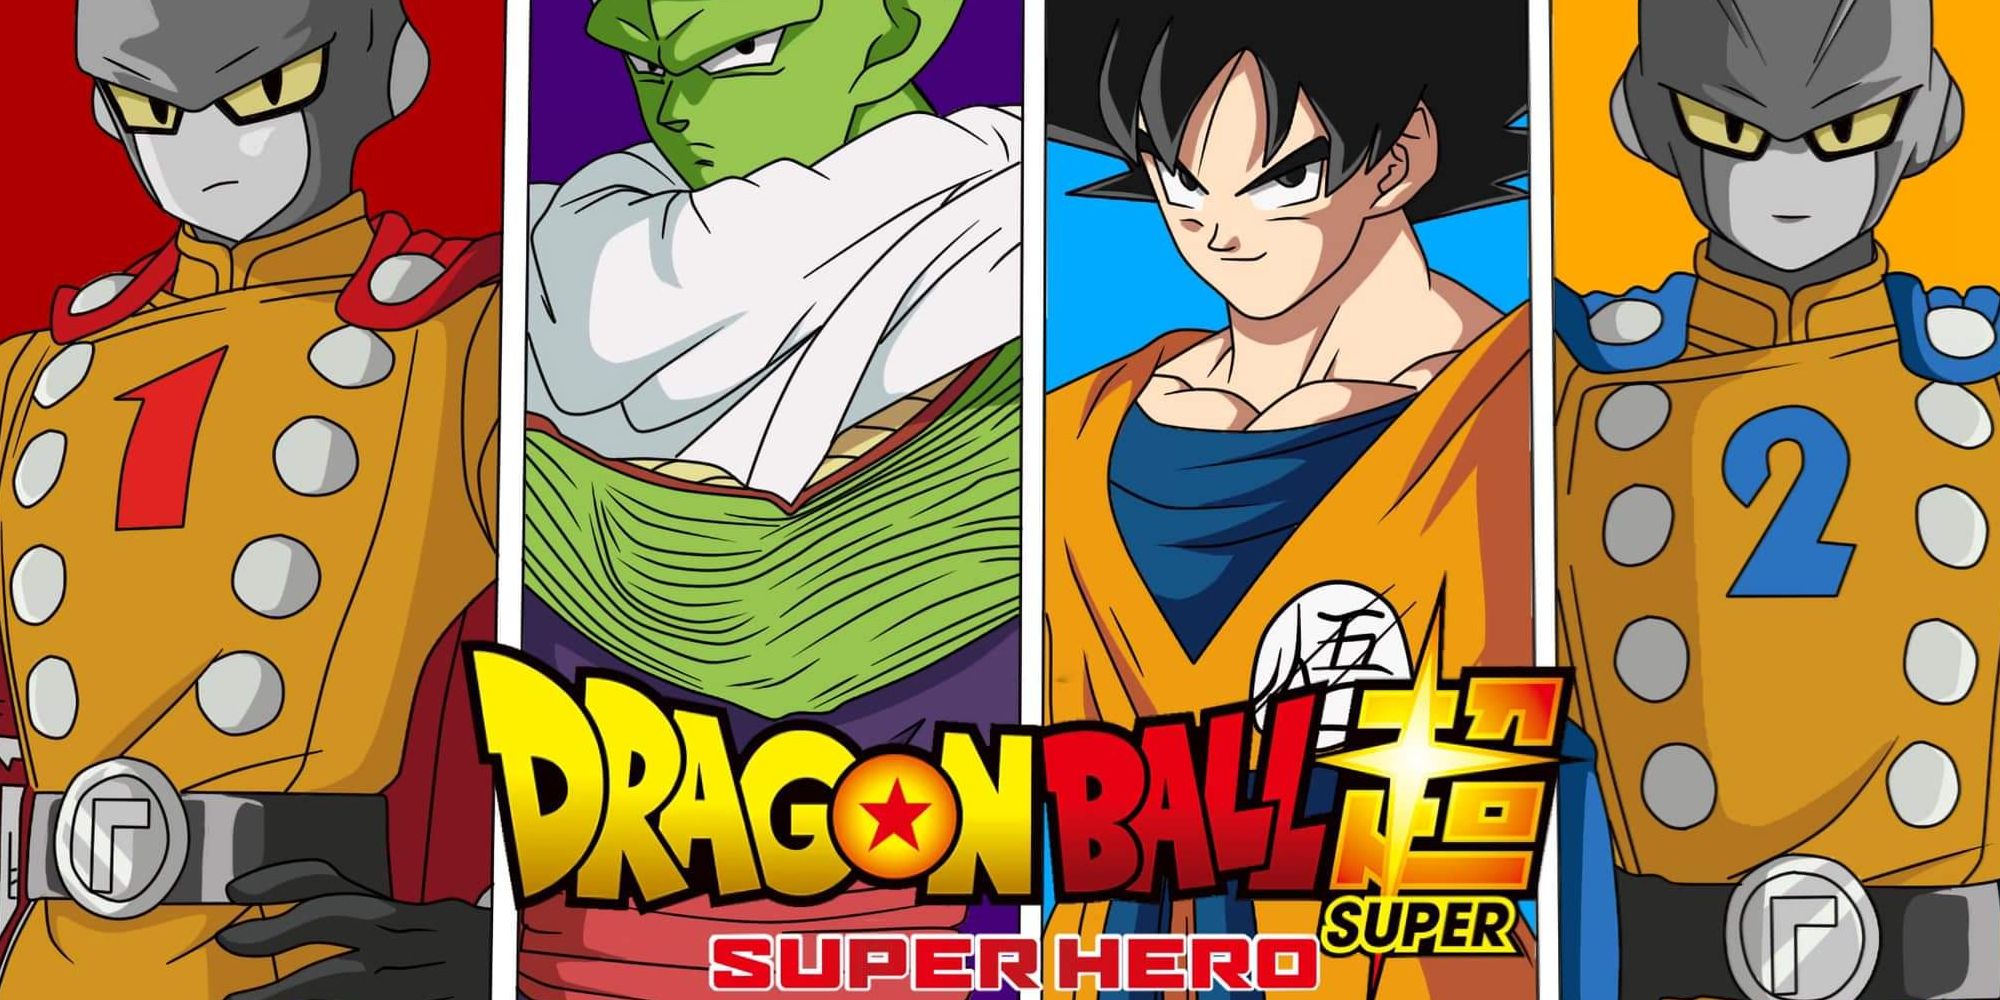 Why Dragon Ball Super: Super Hero's CGI May Debut the Future of